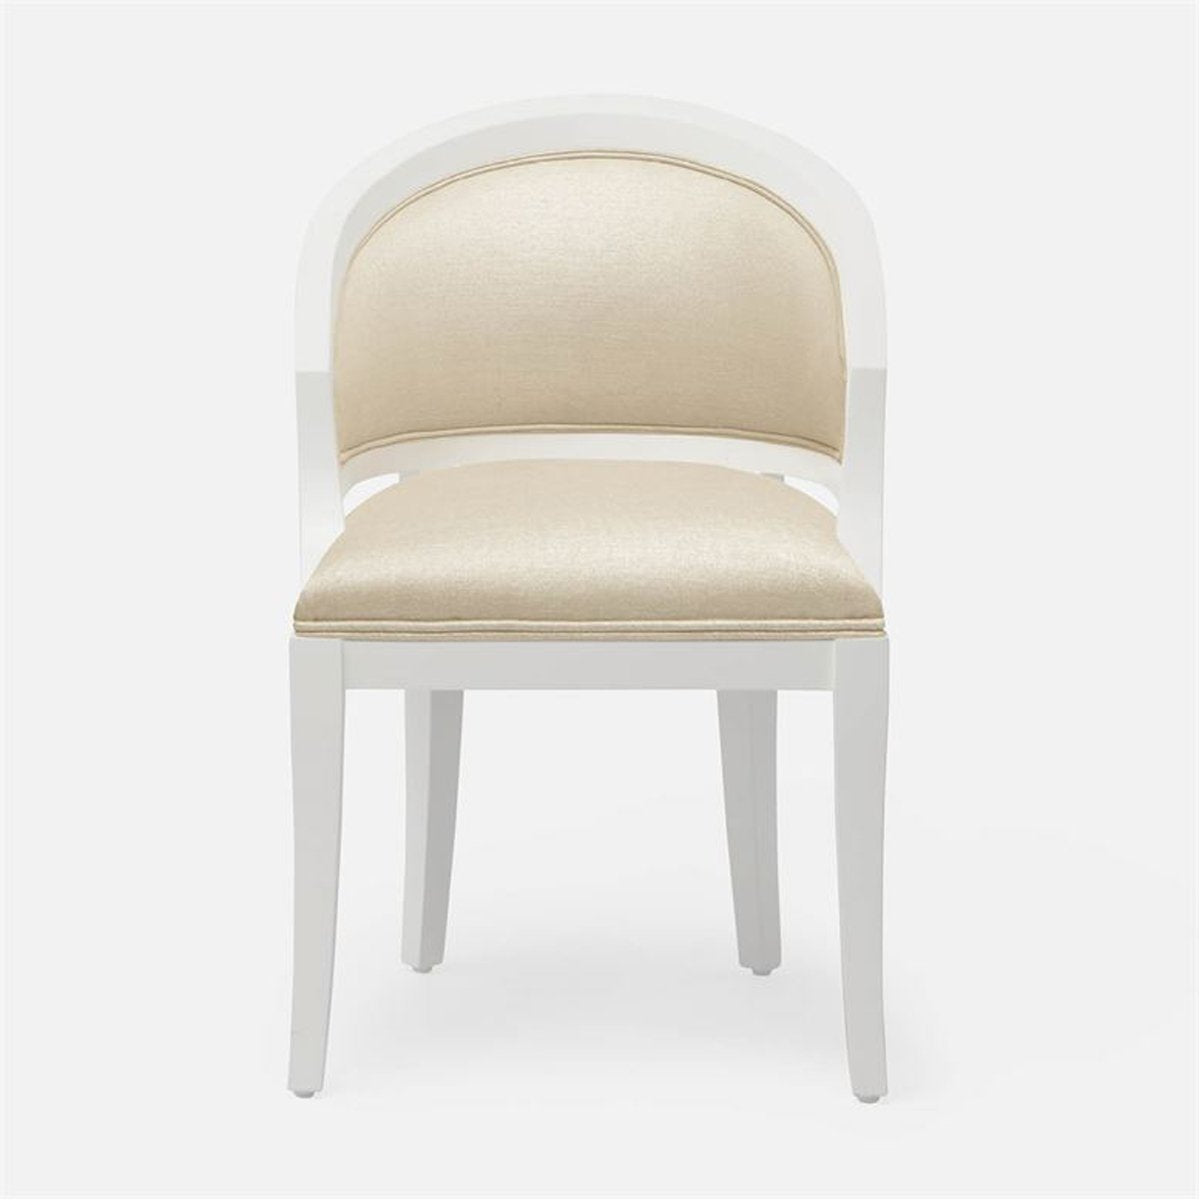 Made Goods Sylvie Curved Back Dining Chair, Brenta Cotton Jute